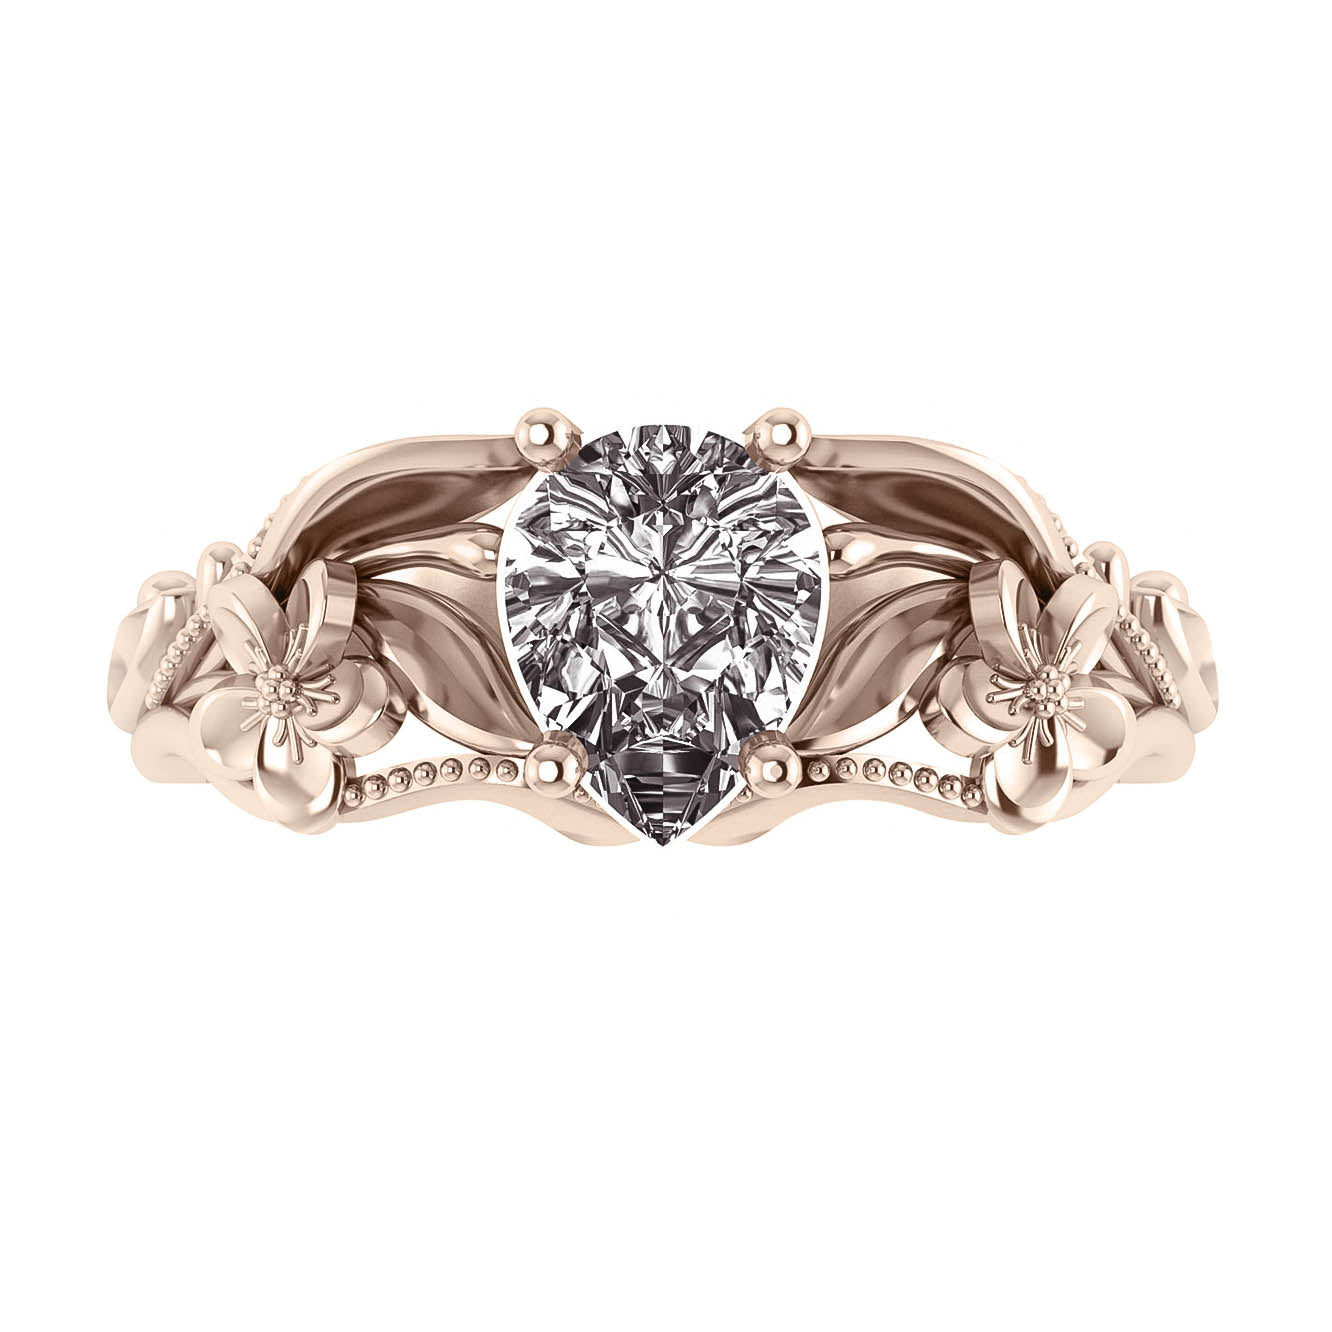 Eloise | floral engagement ring setting with pear cut gemstone - Eden Garden Jewelry™